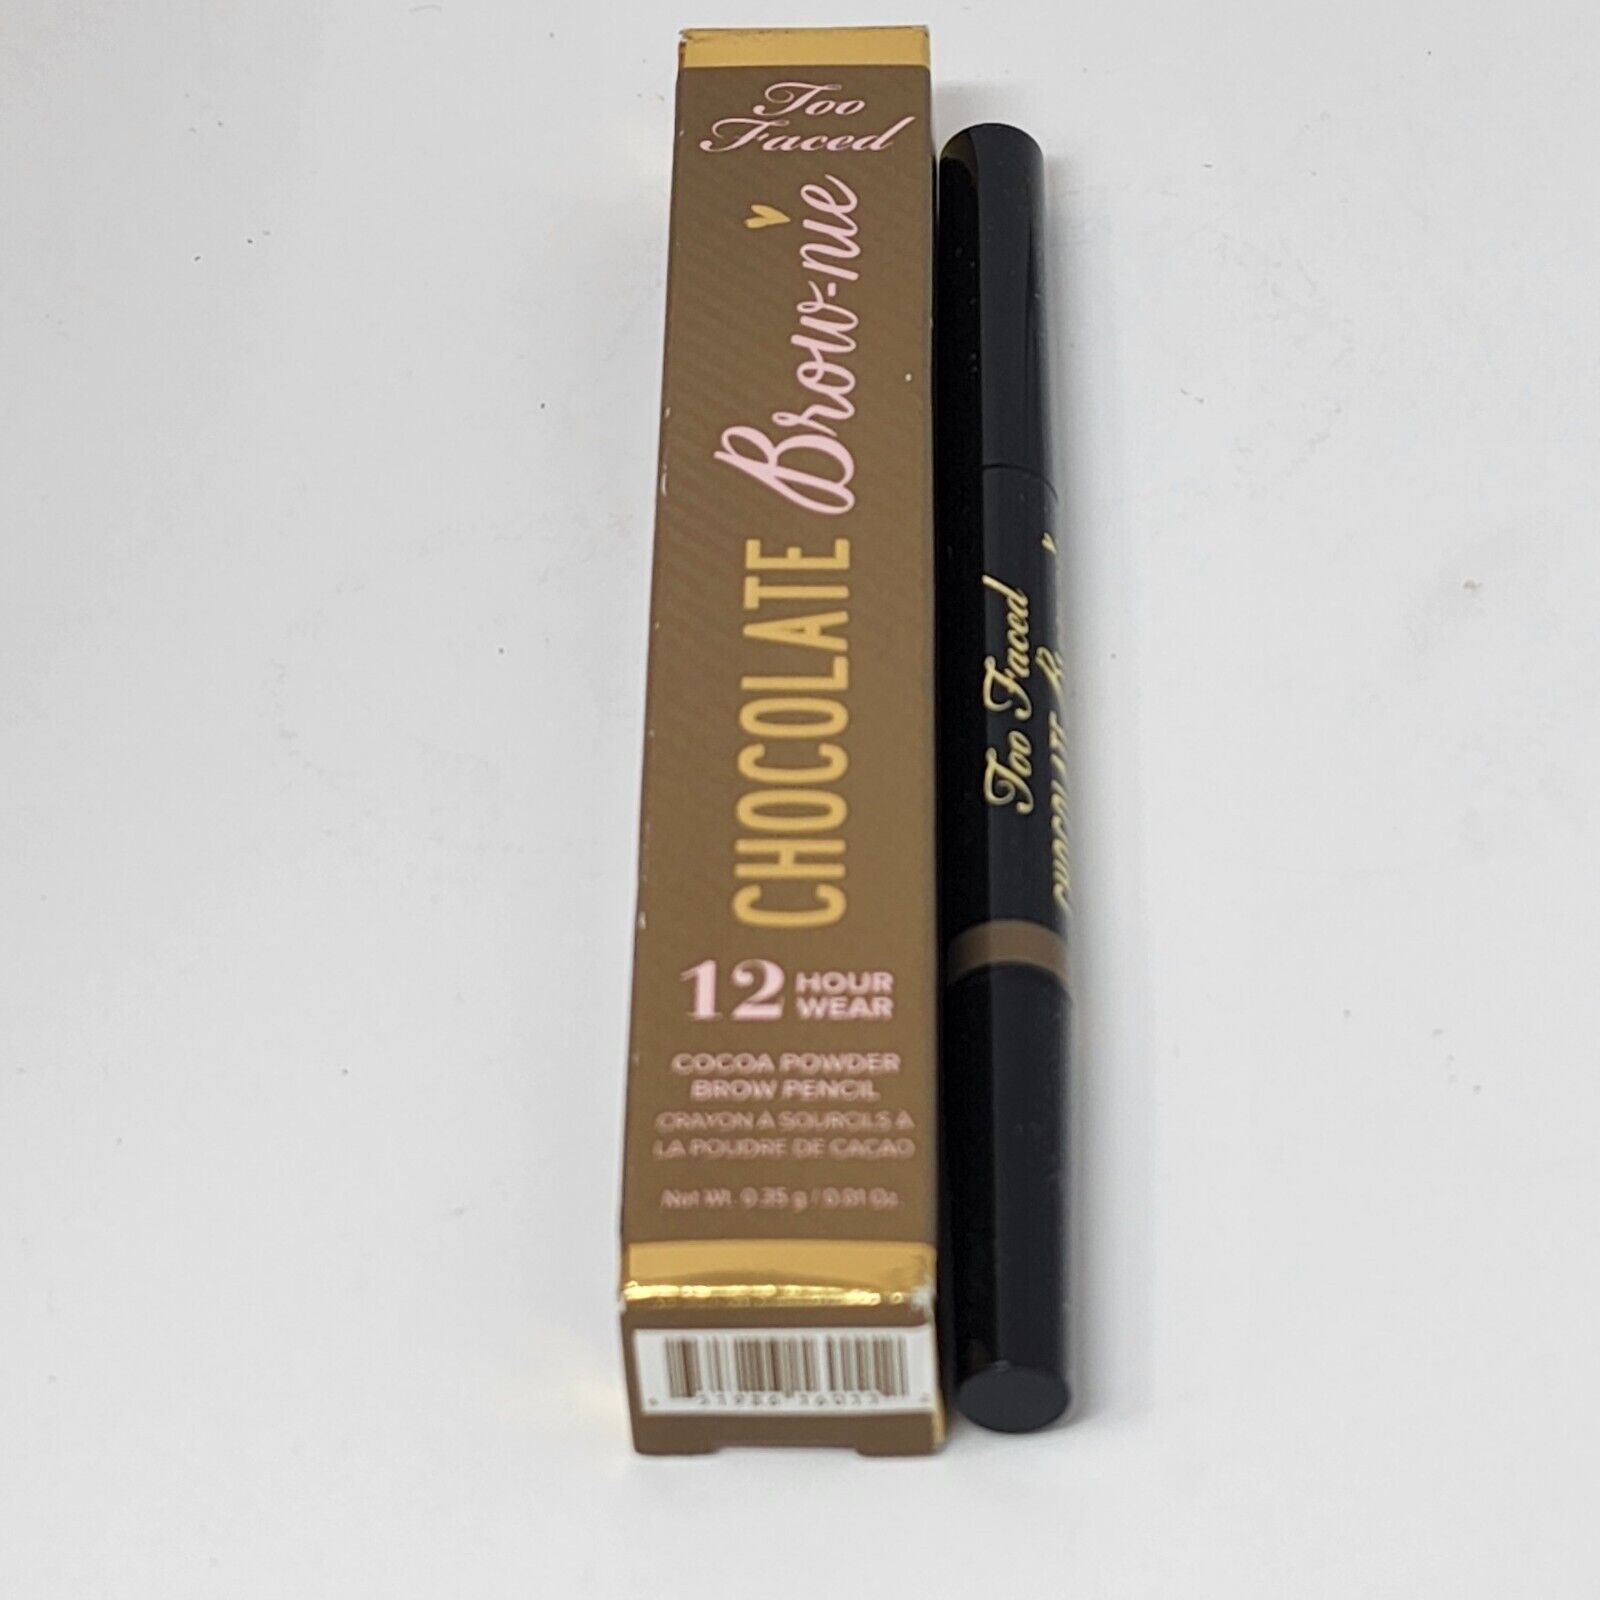 New Authentic Too Faced Chocolate Brownie Cocoa Powder Brow Pencil Taupe - $16.82